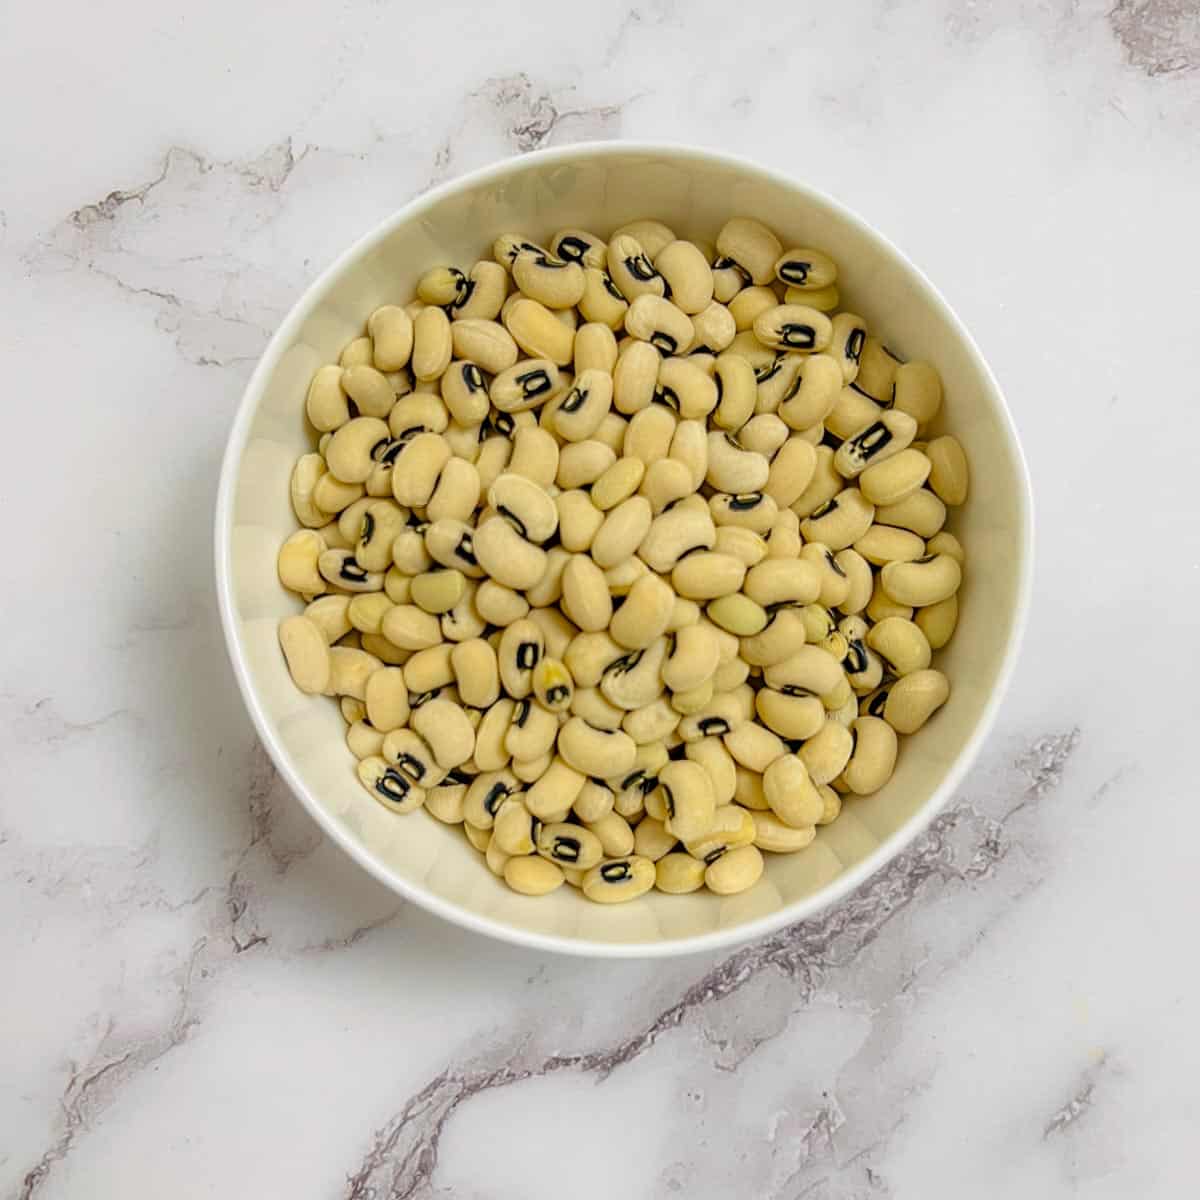 Dried black-eyed peas in a small bowl.